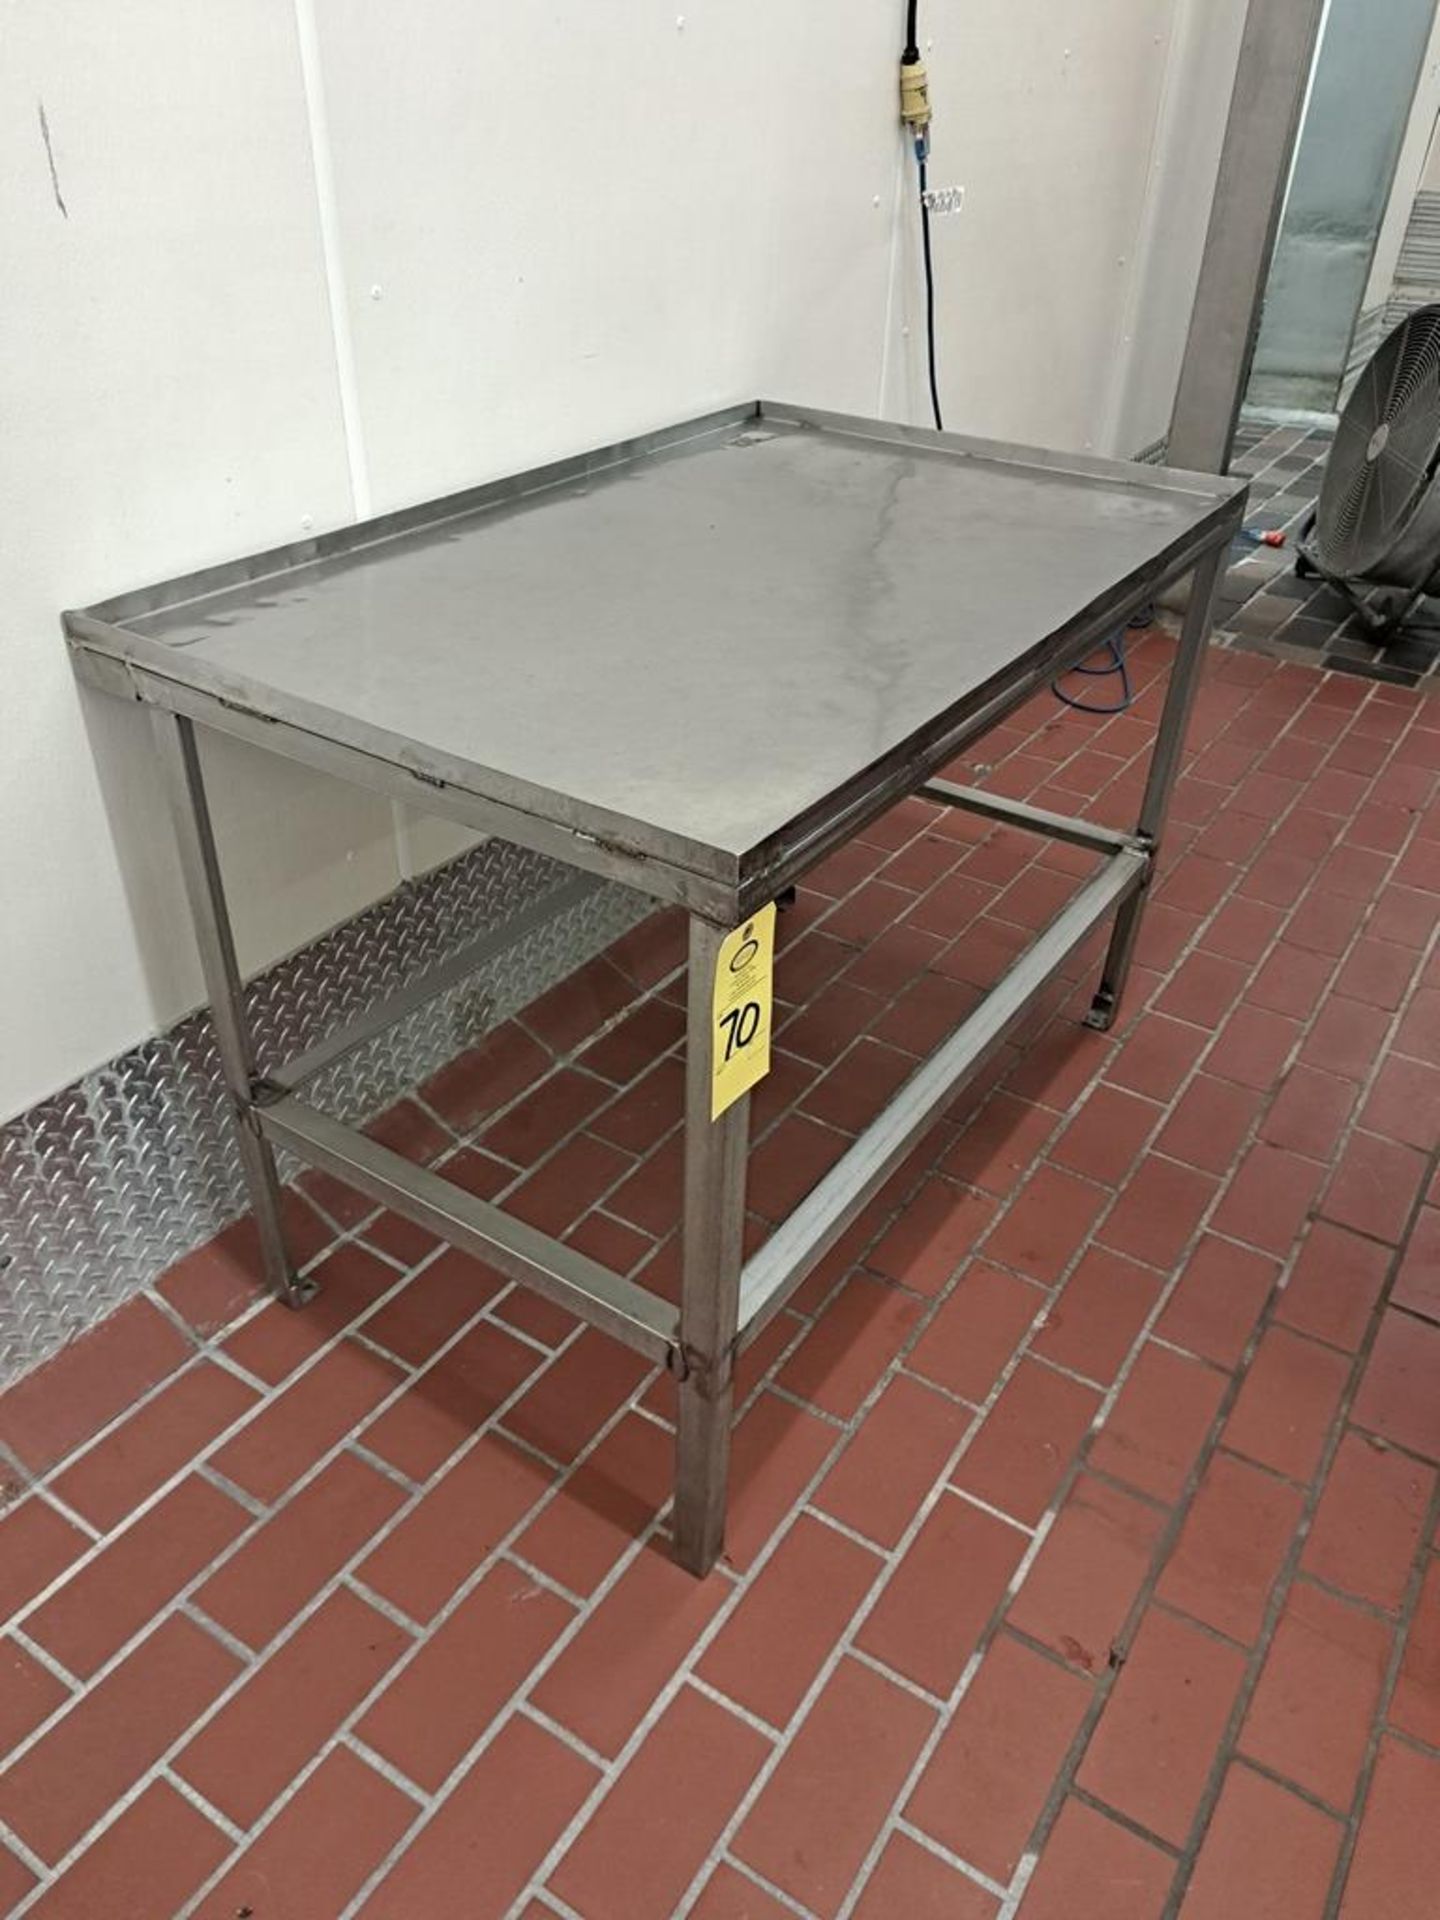 Stainless Steel Table, 29" W X 46" L X 32" T (Required Loading Fee $35.00 Rigger: Norm Pavlish,